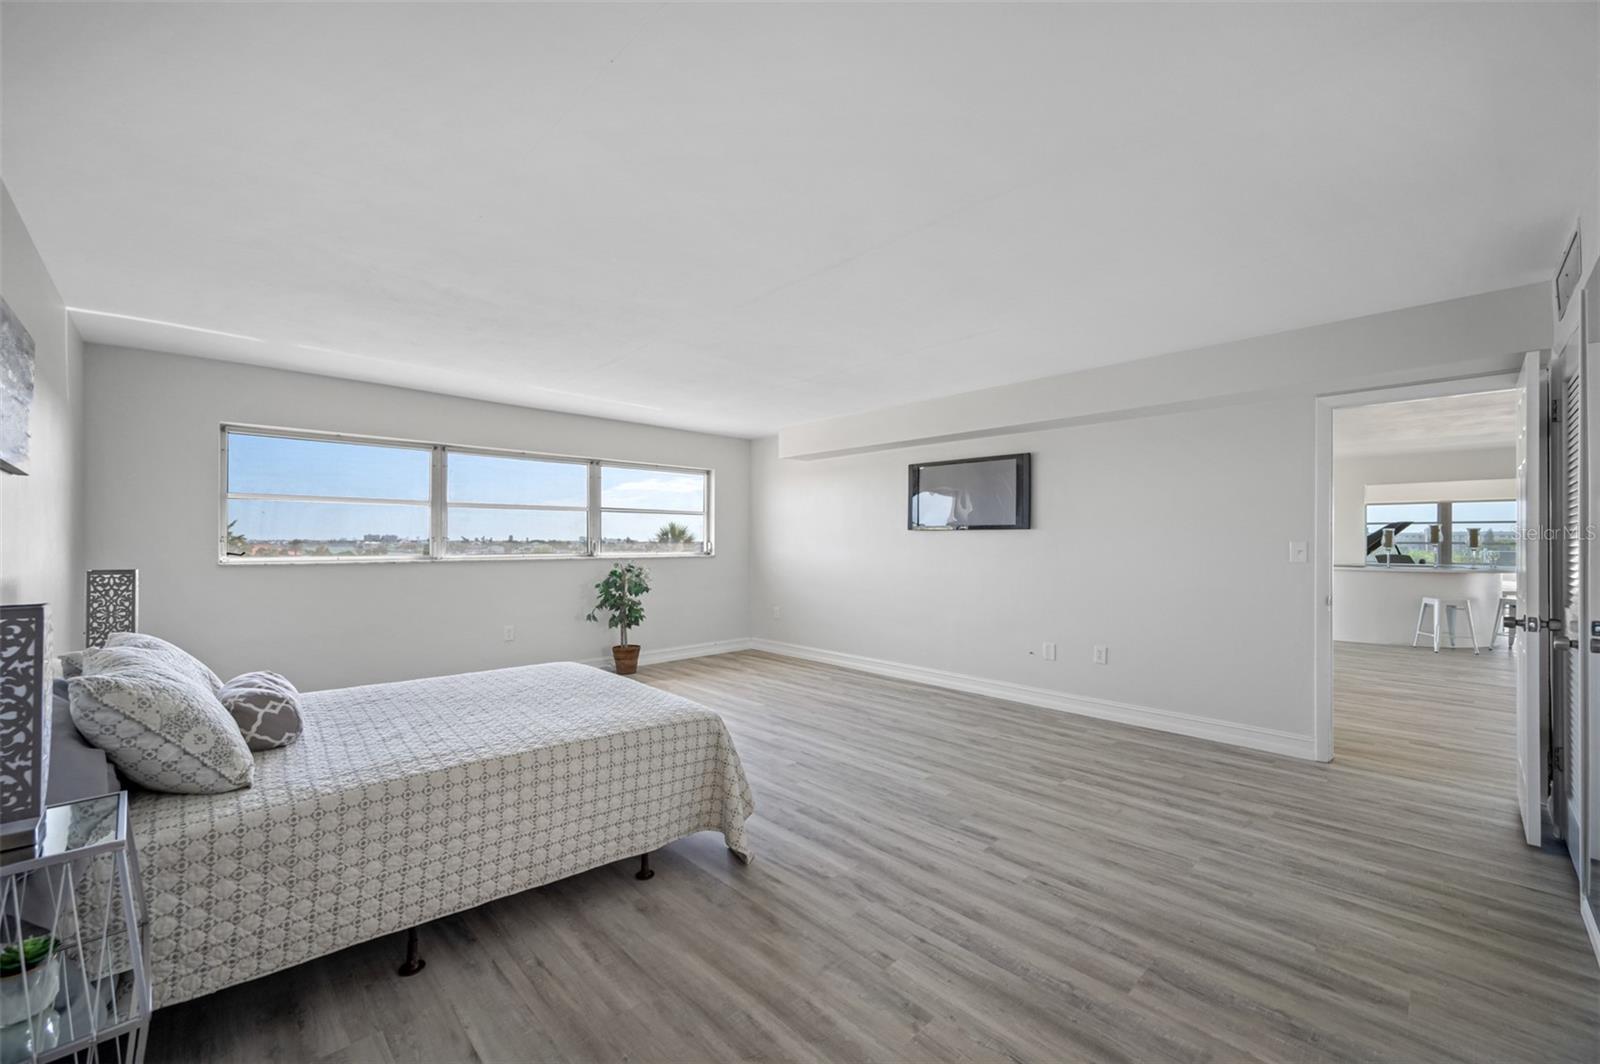 Primary bedroom with views of intracoastal waterway and community pool.